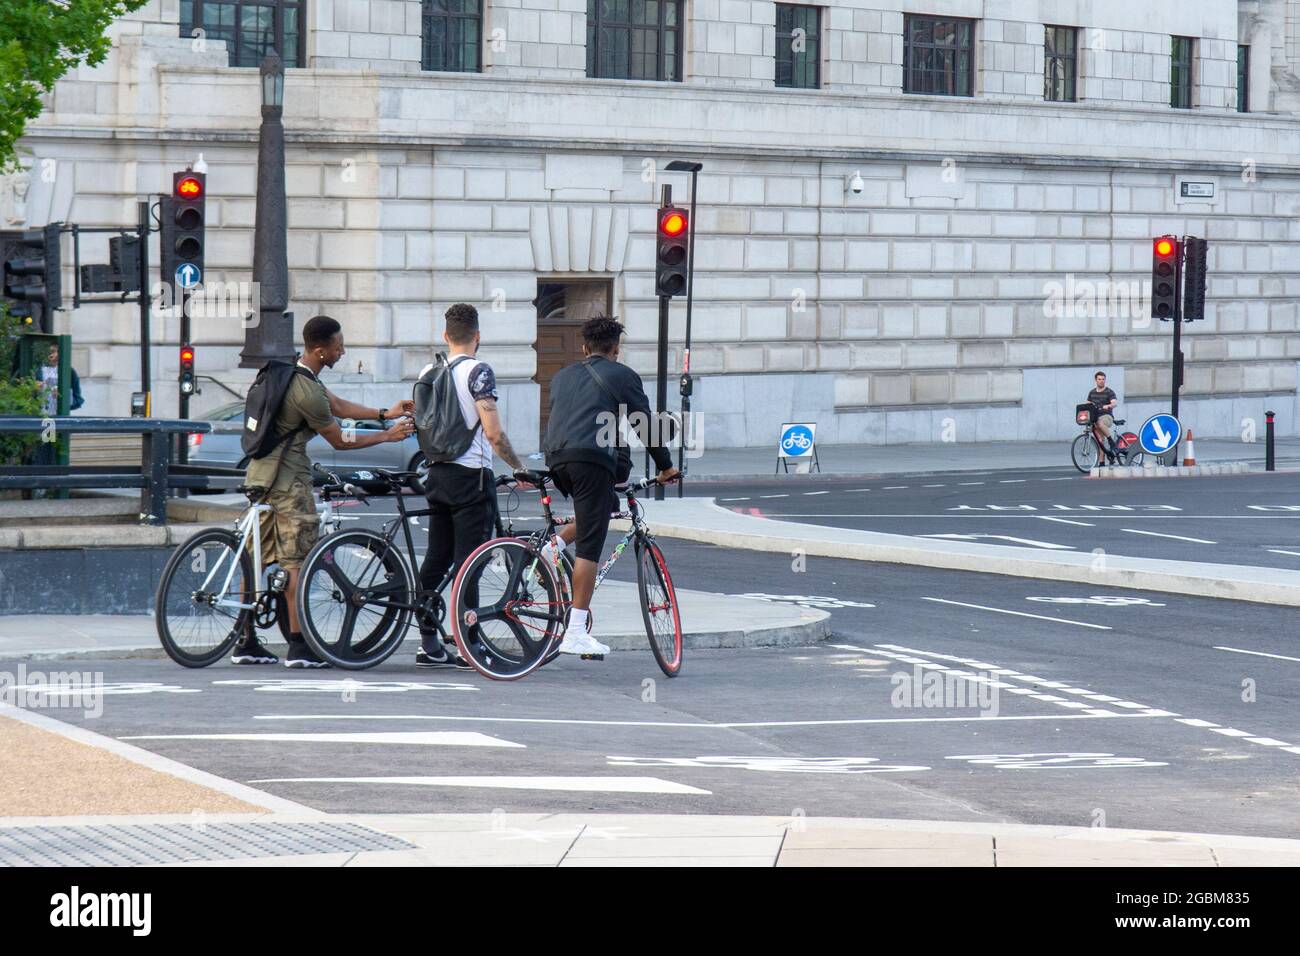 Cyclists ride through central London on the newly opened 'Cycle Superhighway' at Blackfriars Bridge. Stock Photo